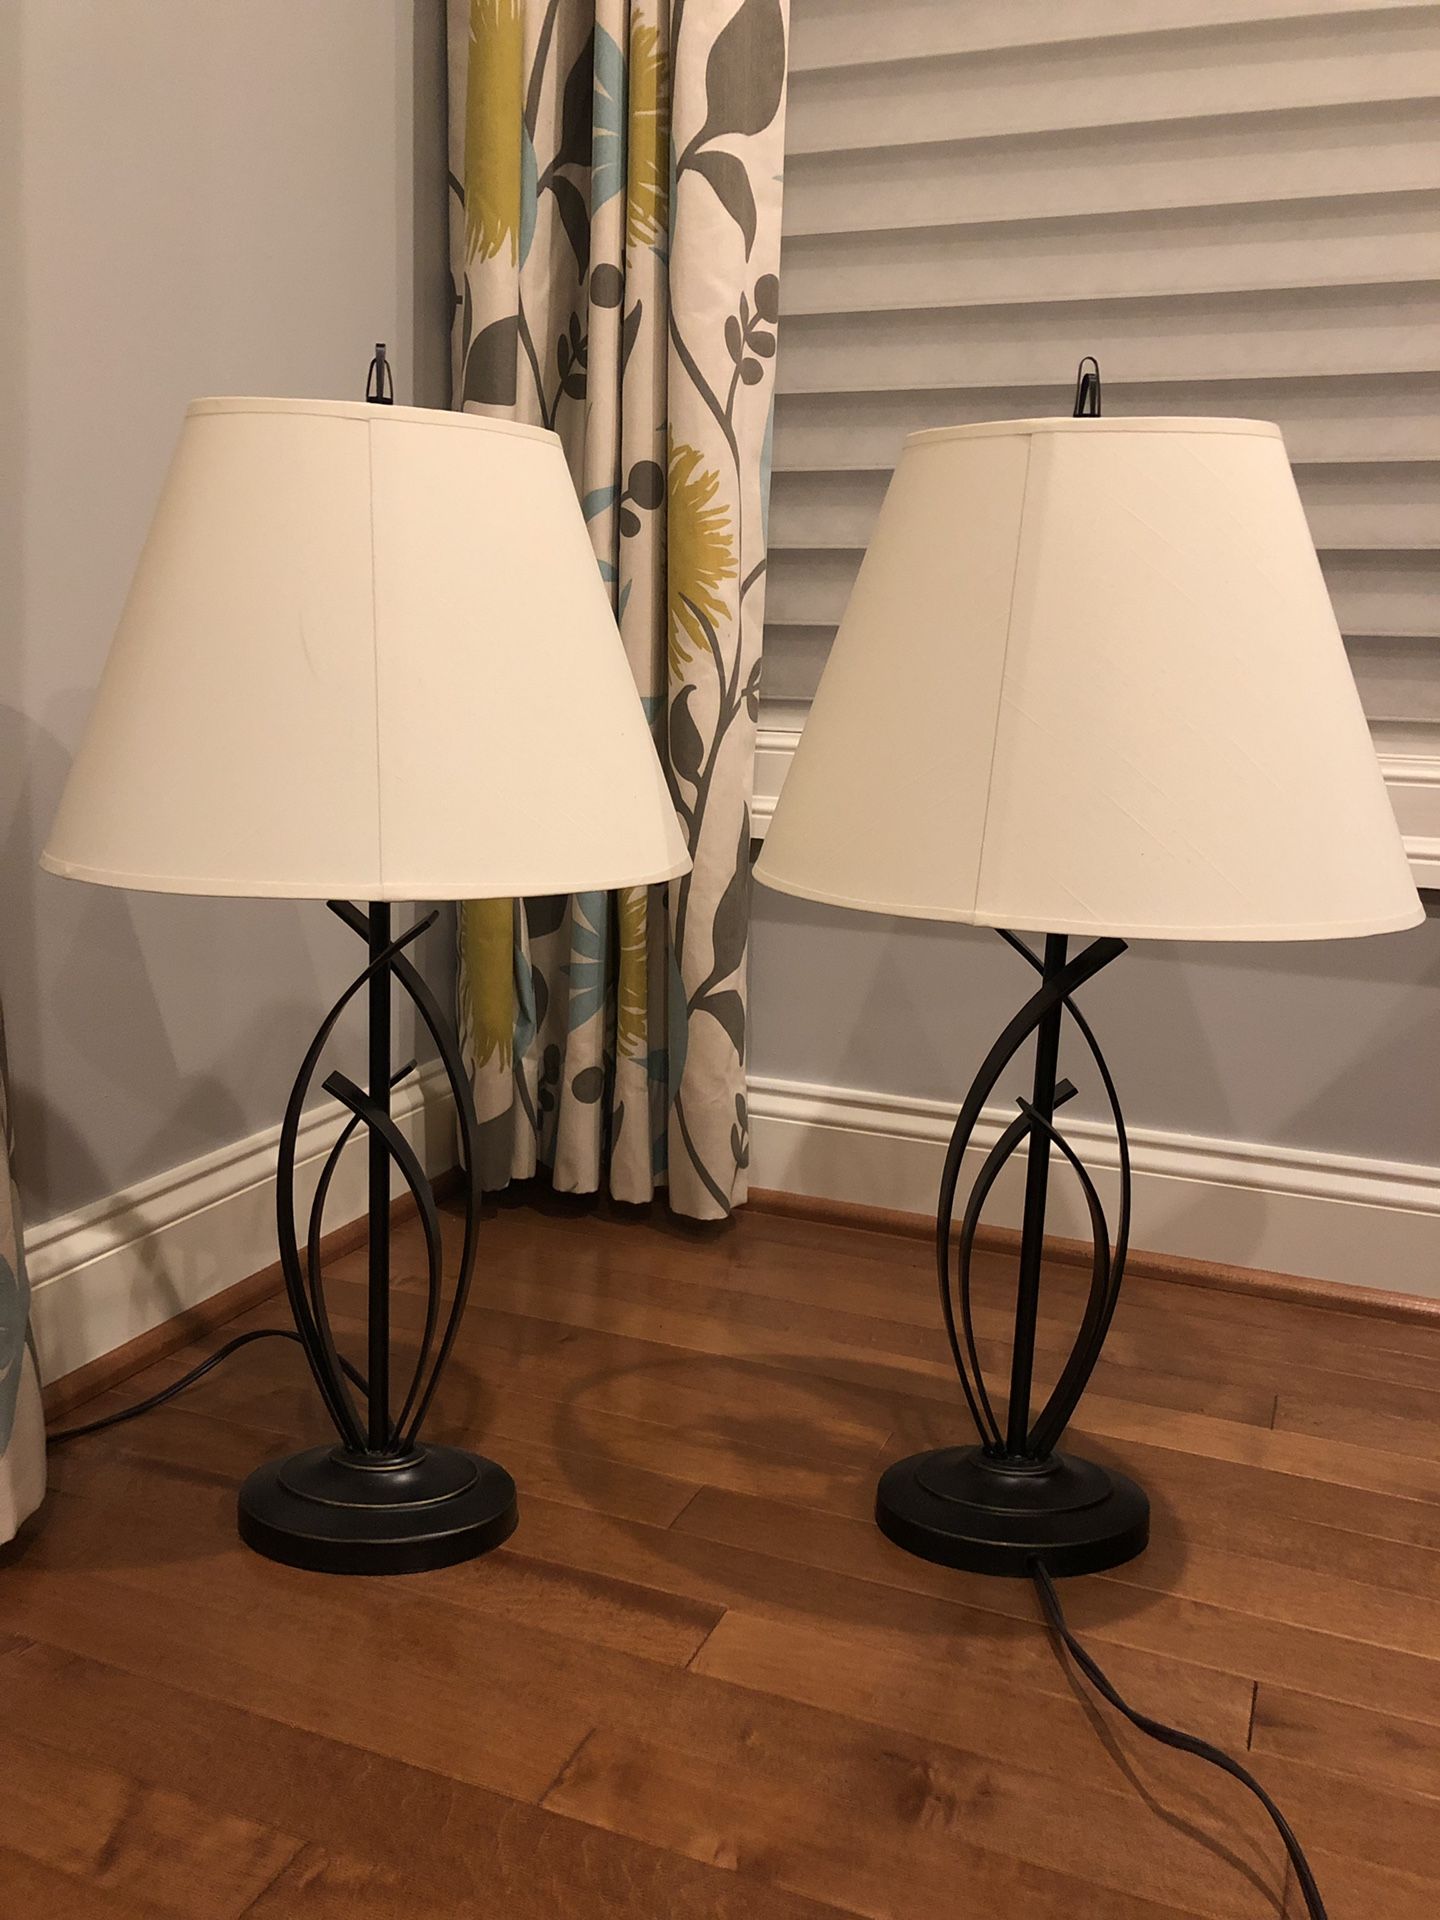 Two table lamps for sale - like NEW